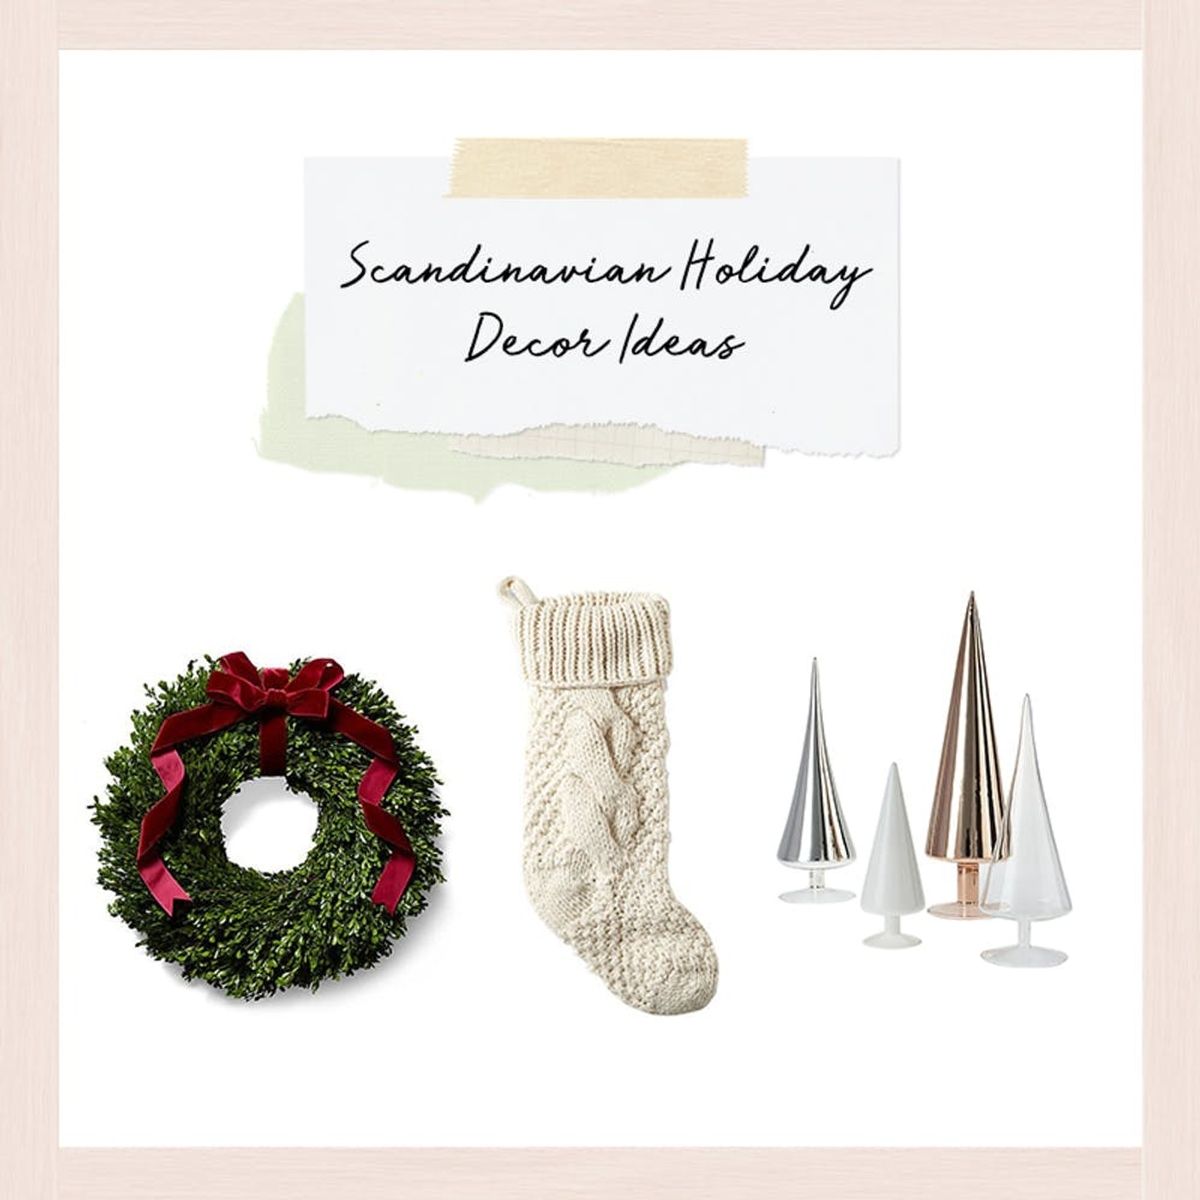 3 Ways to Get That Trendy Scandinavian Holiday Style in Your Home